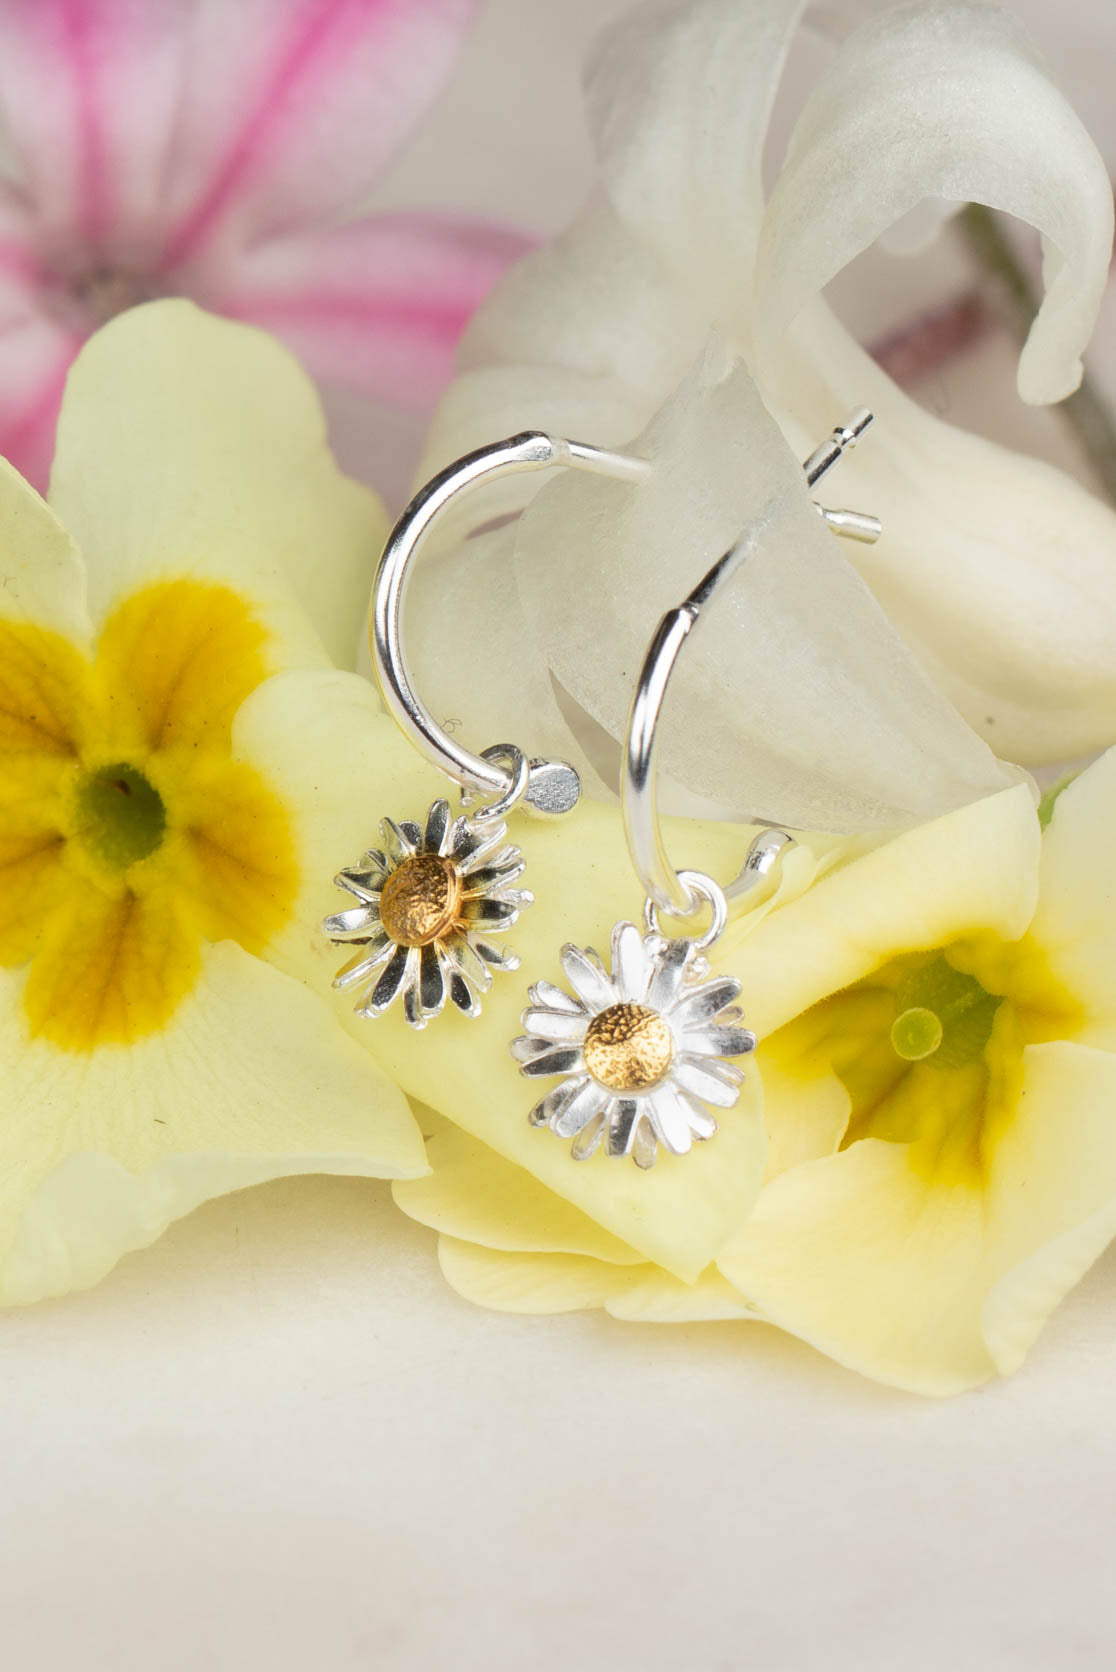 Sterling Silver and Gold Daisy Hoops - Daisy Flower Head on Hoops